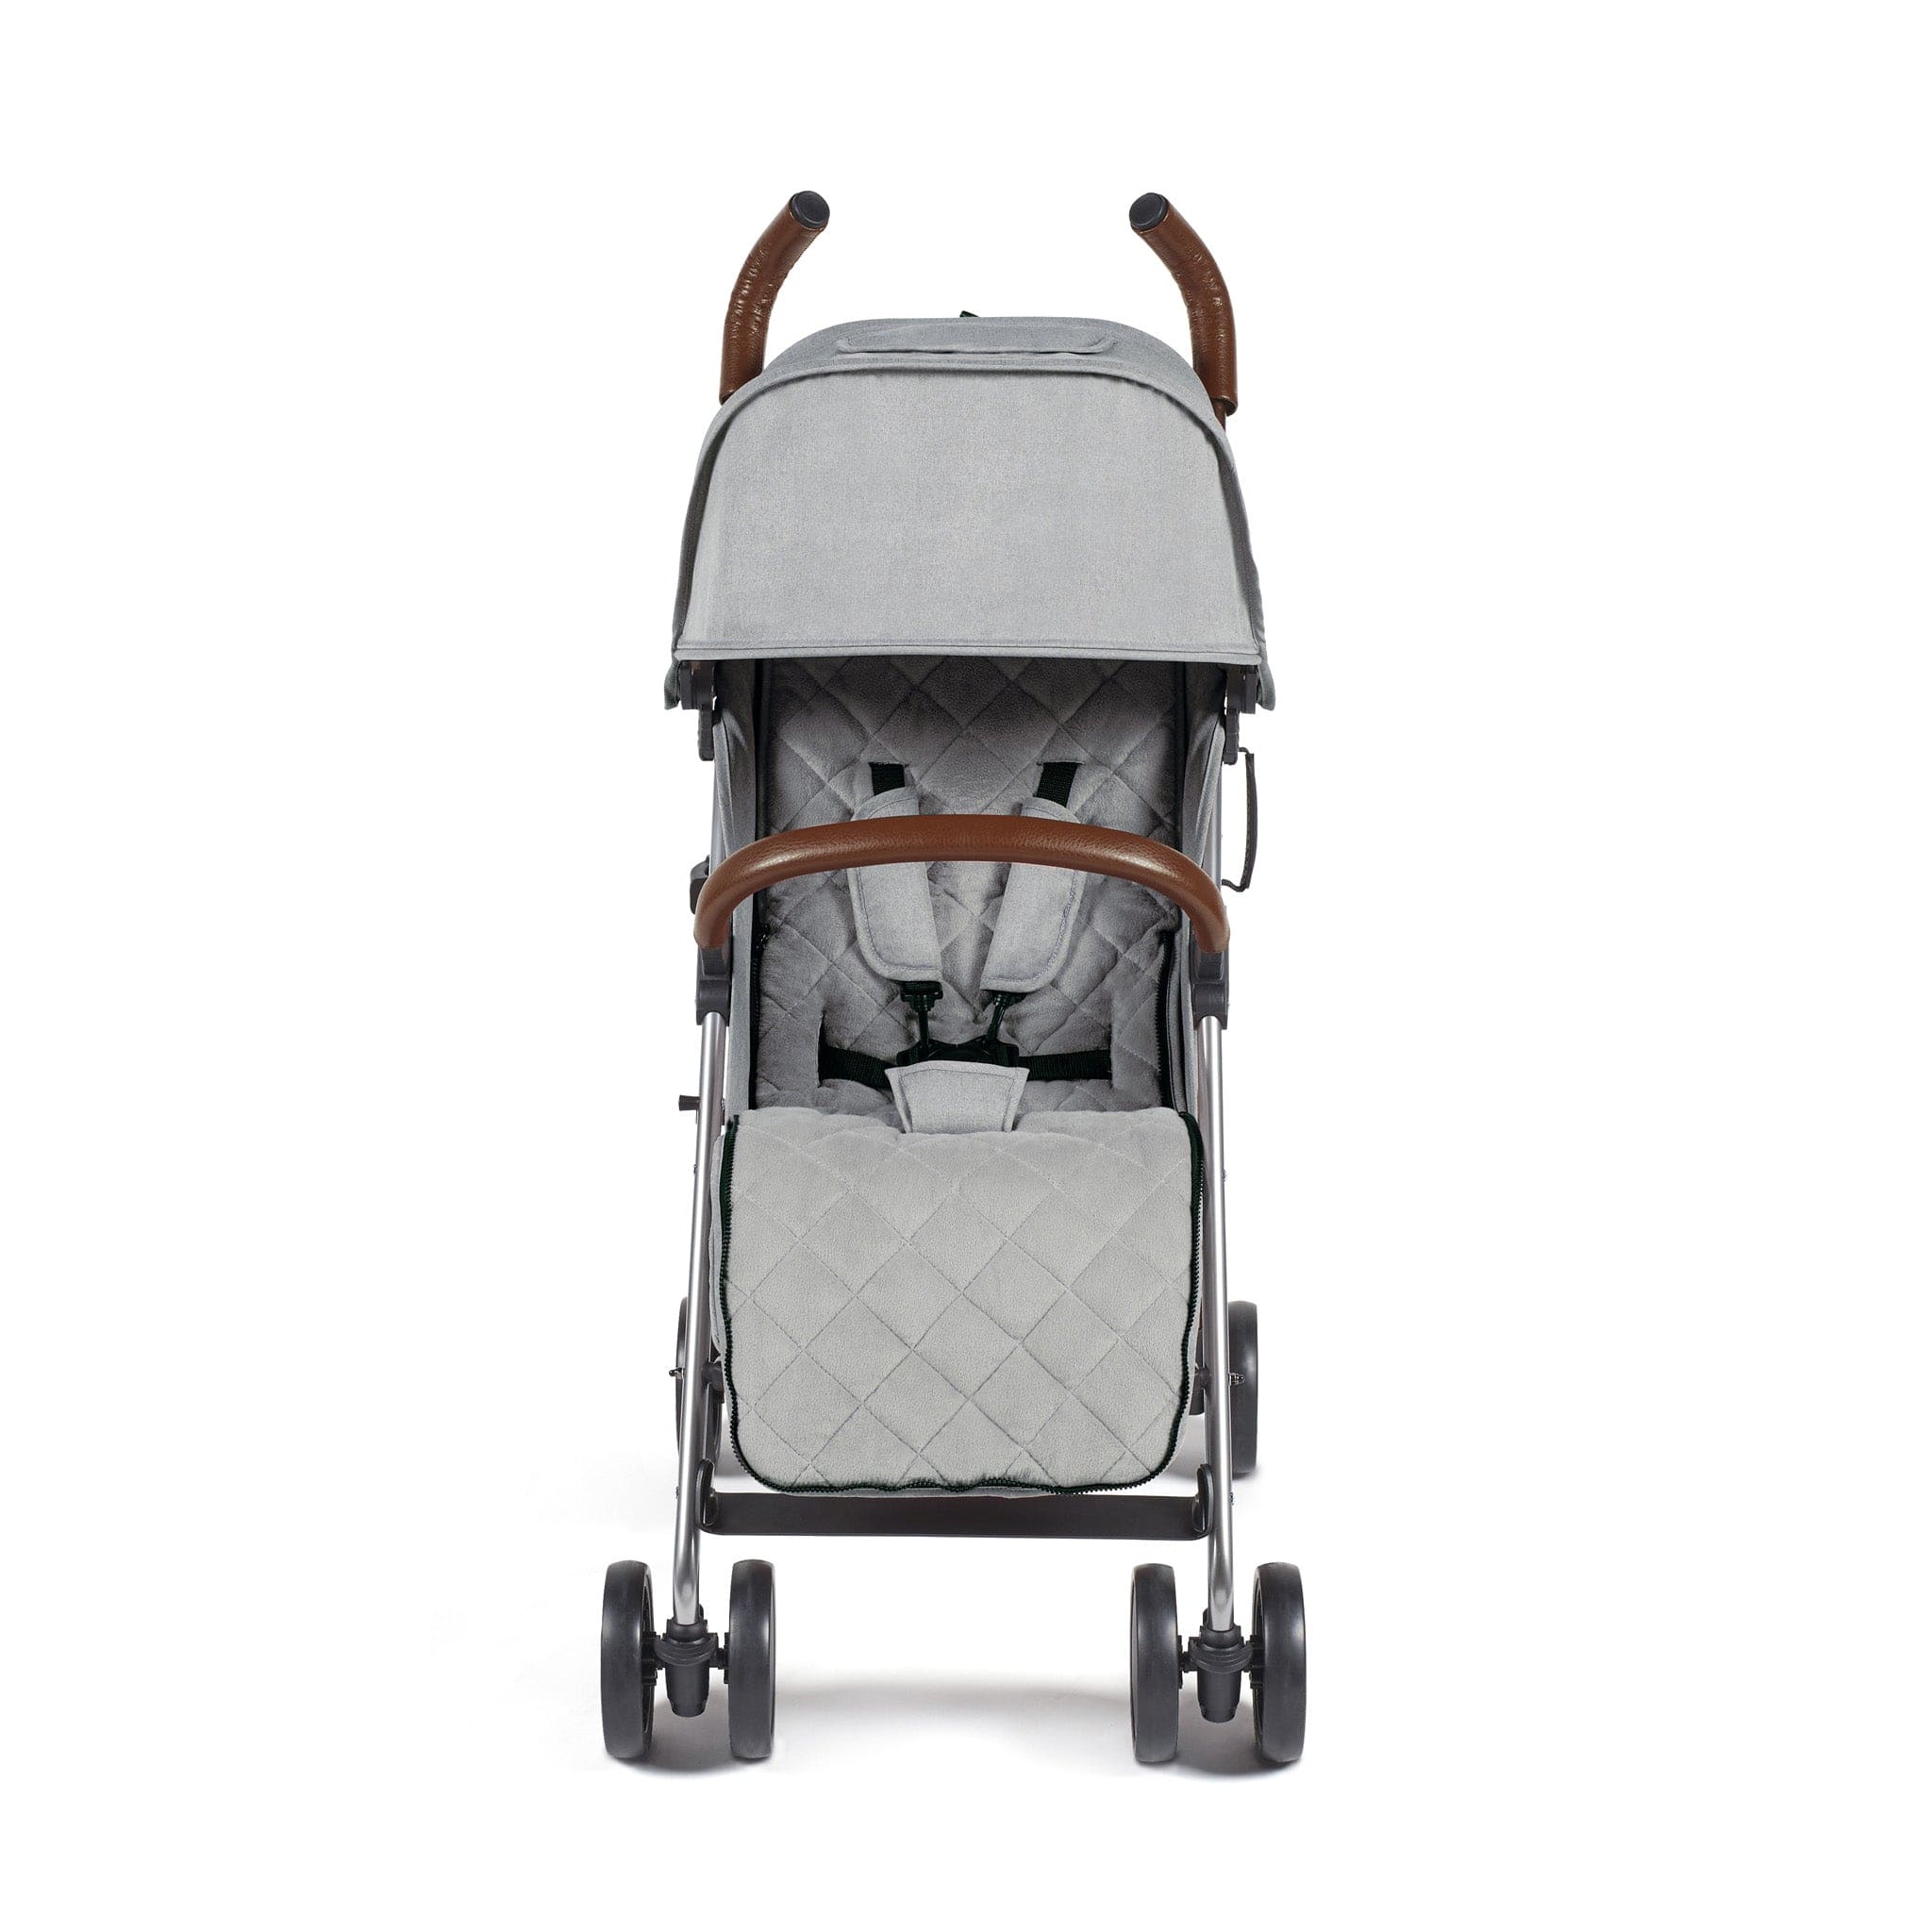 Ickle Bubba Discovery Prime Stroller Silver/Grey Pushchairs & Buggies 15-002-300-056 0700355999423